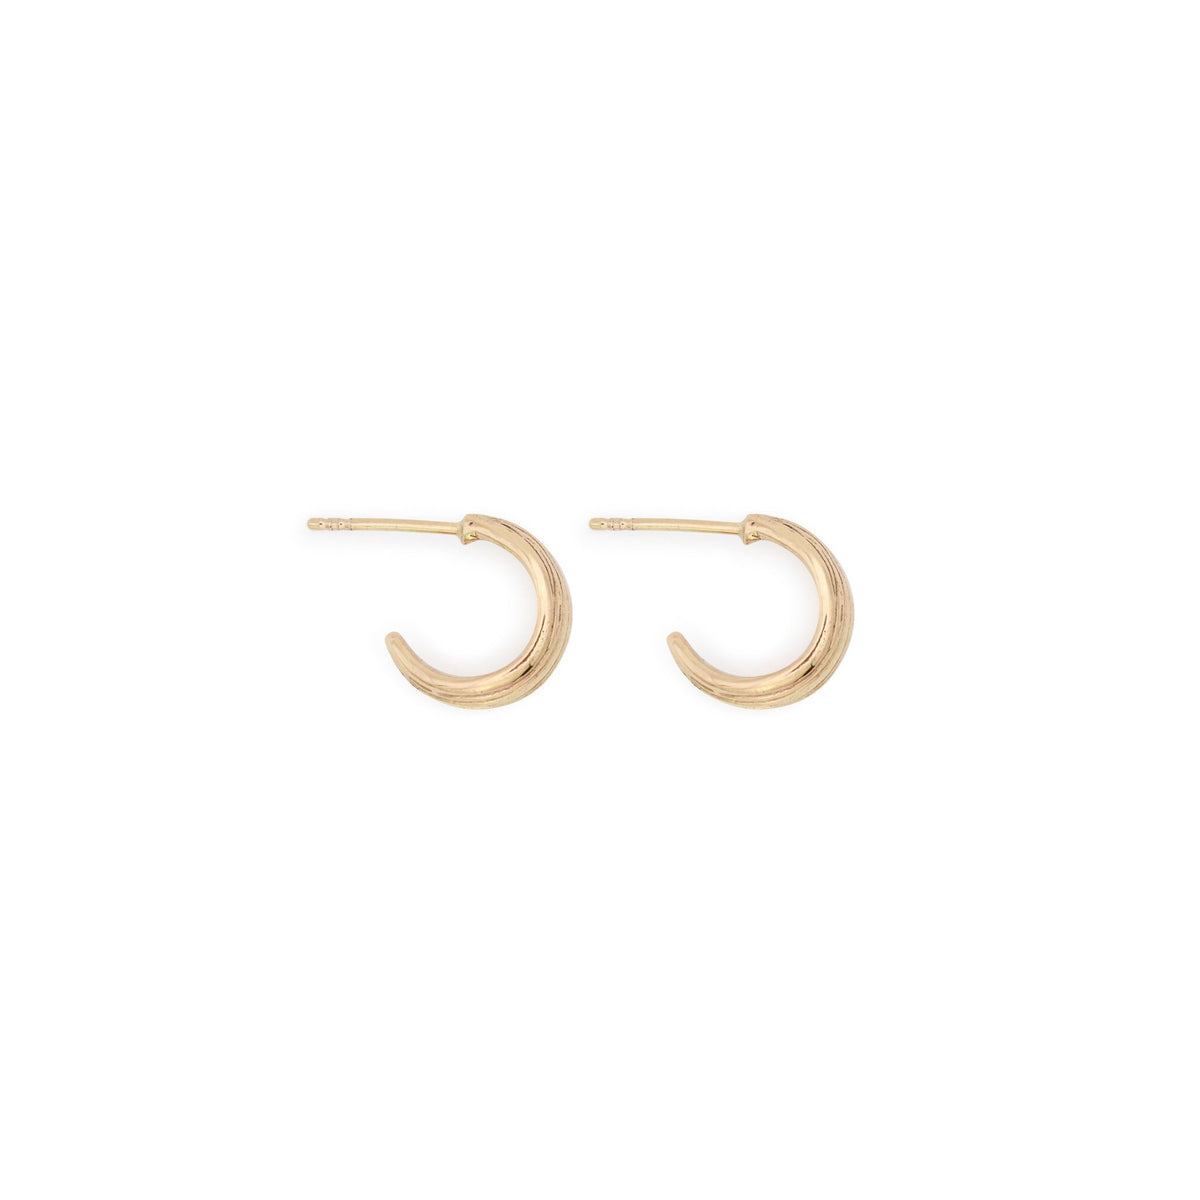 Faro Line Hoops - Ethically Made Earrings by Catori Life | Catori Life